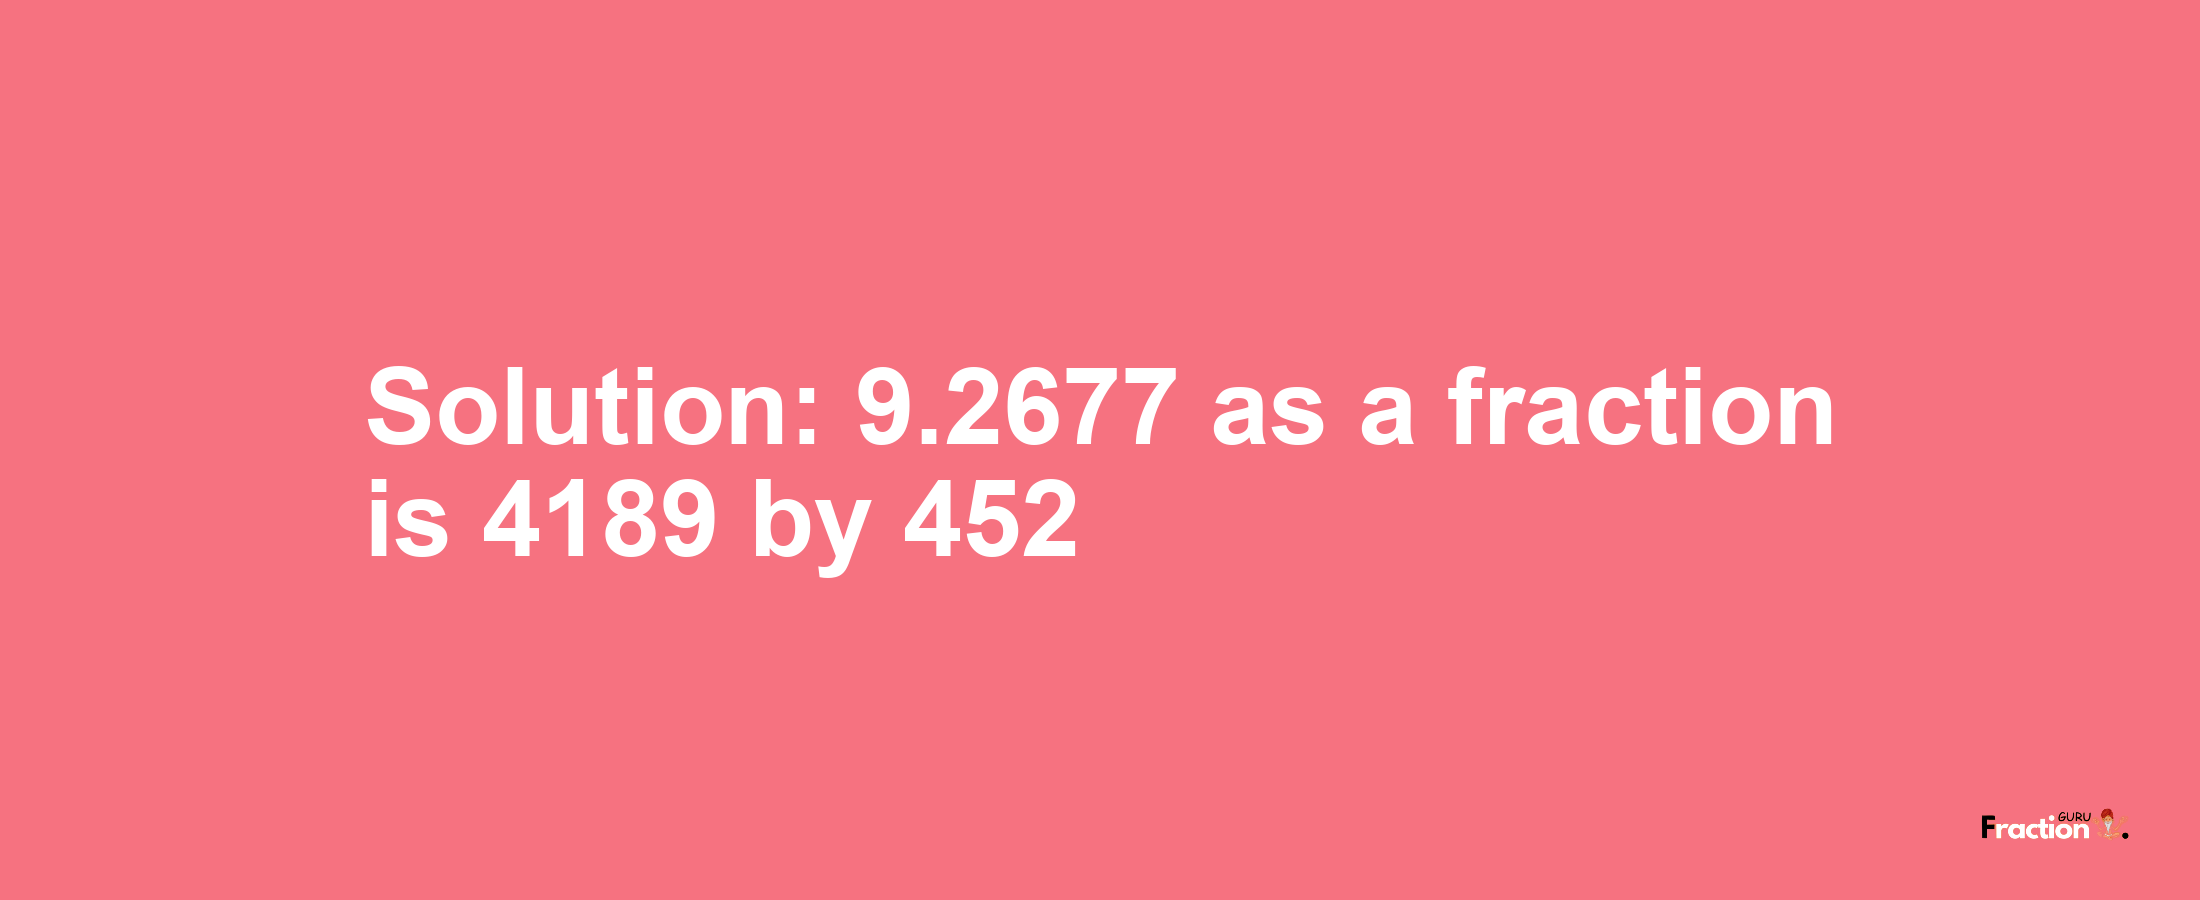 Solution:9.2677 as a fraction is 4189/452